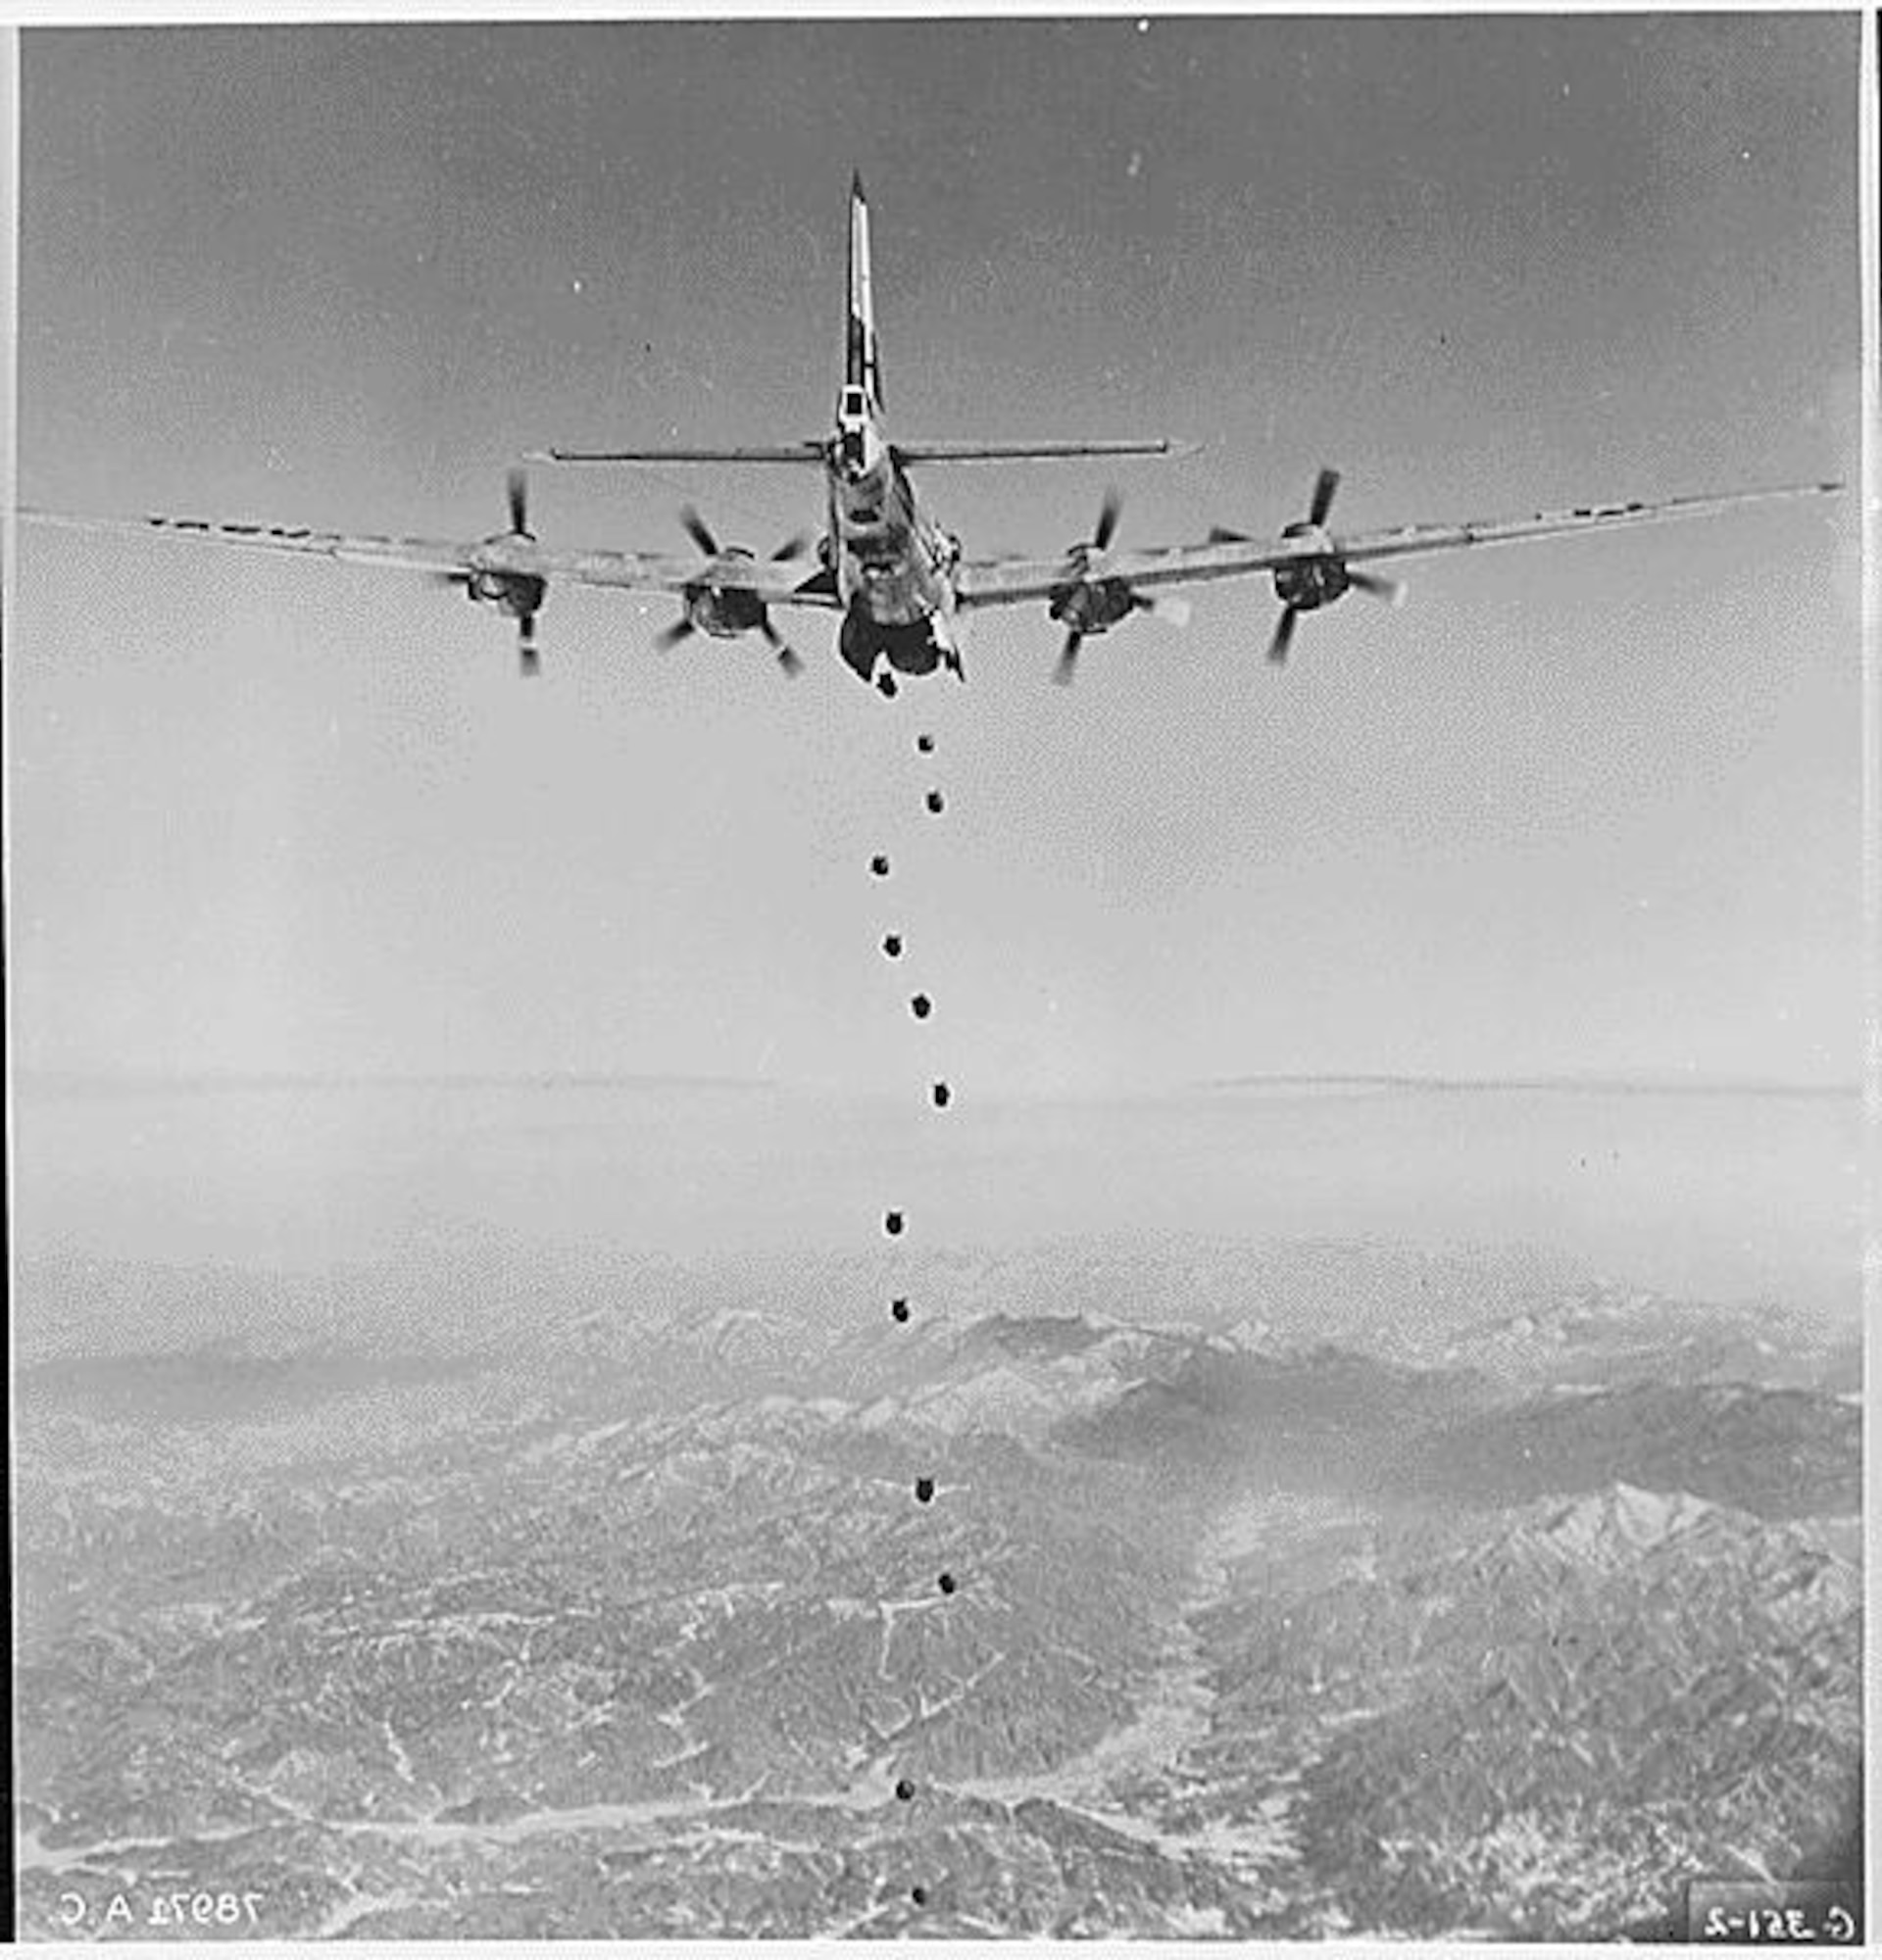 THE NATIONAL ARCHIVES - Bombs Away-Regardless of the type of enemy target lying in this rugged, mountainous terrain of Korea, very little will remain after the falling bombs have done their work. This striking photograph of the lead bomber was made from a B-29 "Superfort" of the Far East Air Forces 19th Bomber Group on the 150th combat mission the 19th Bomber Group has flown since the start of the Korean war., ca. 02/1951